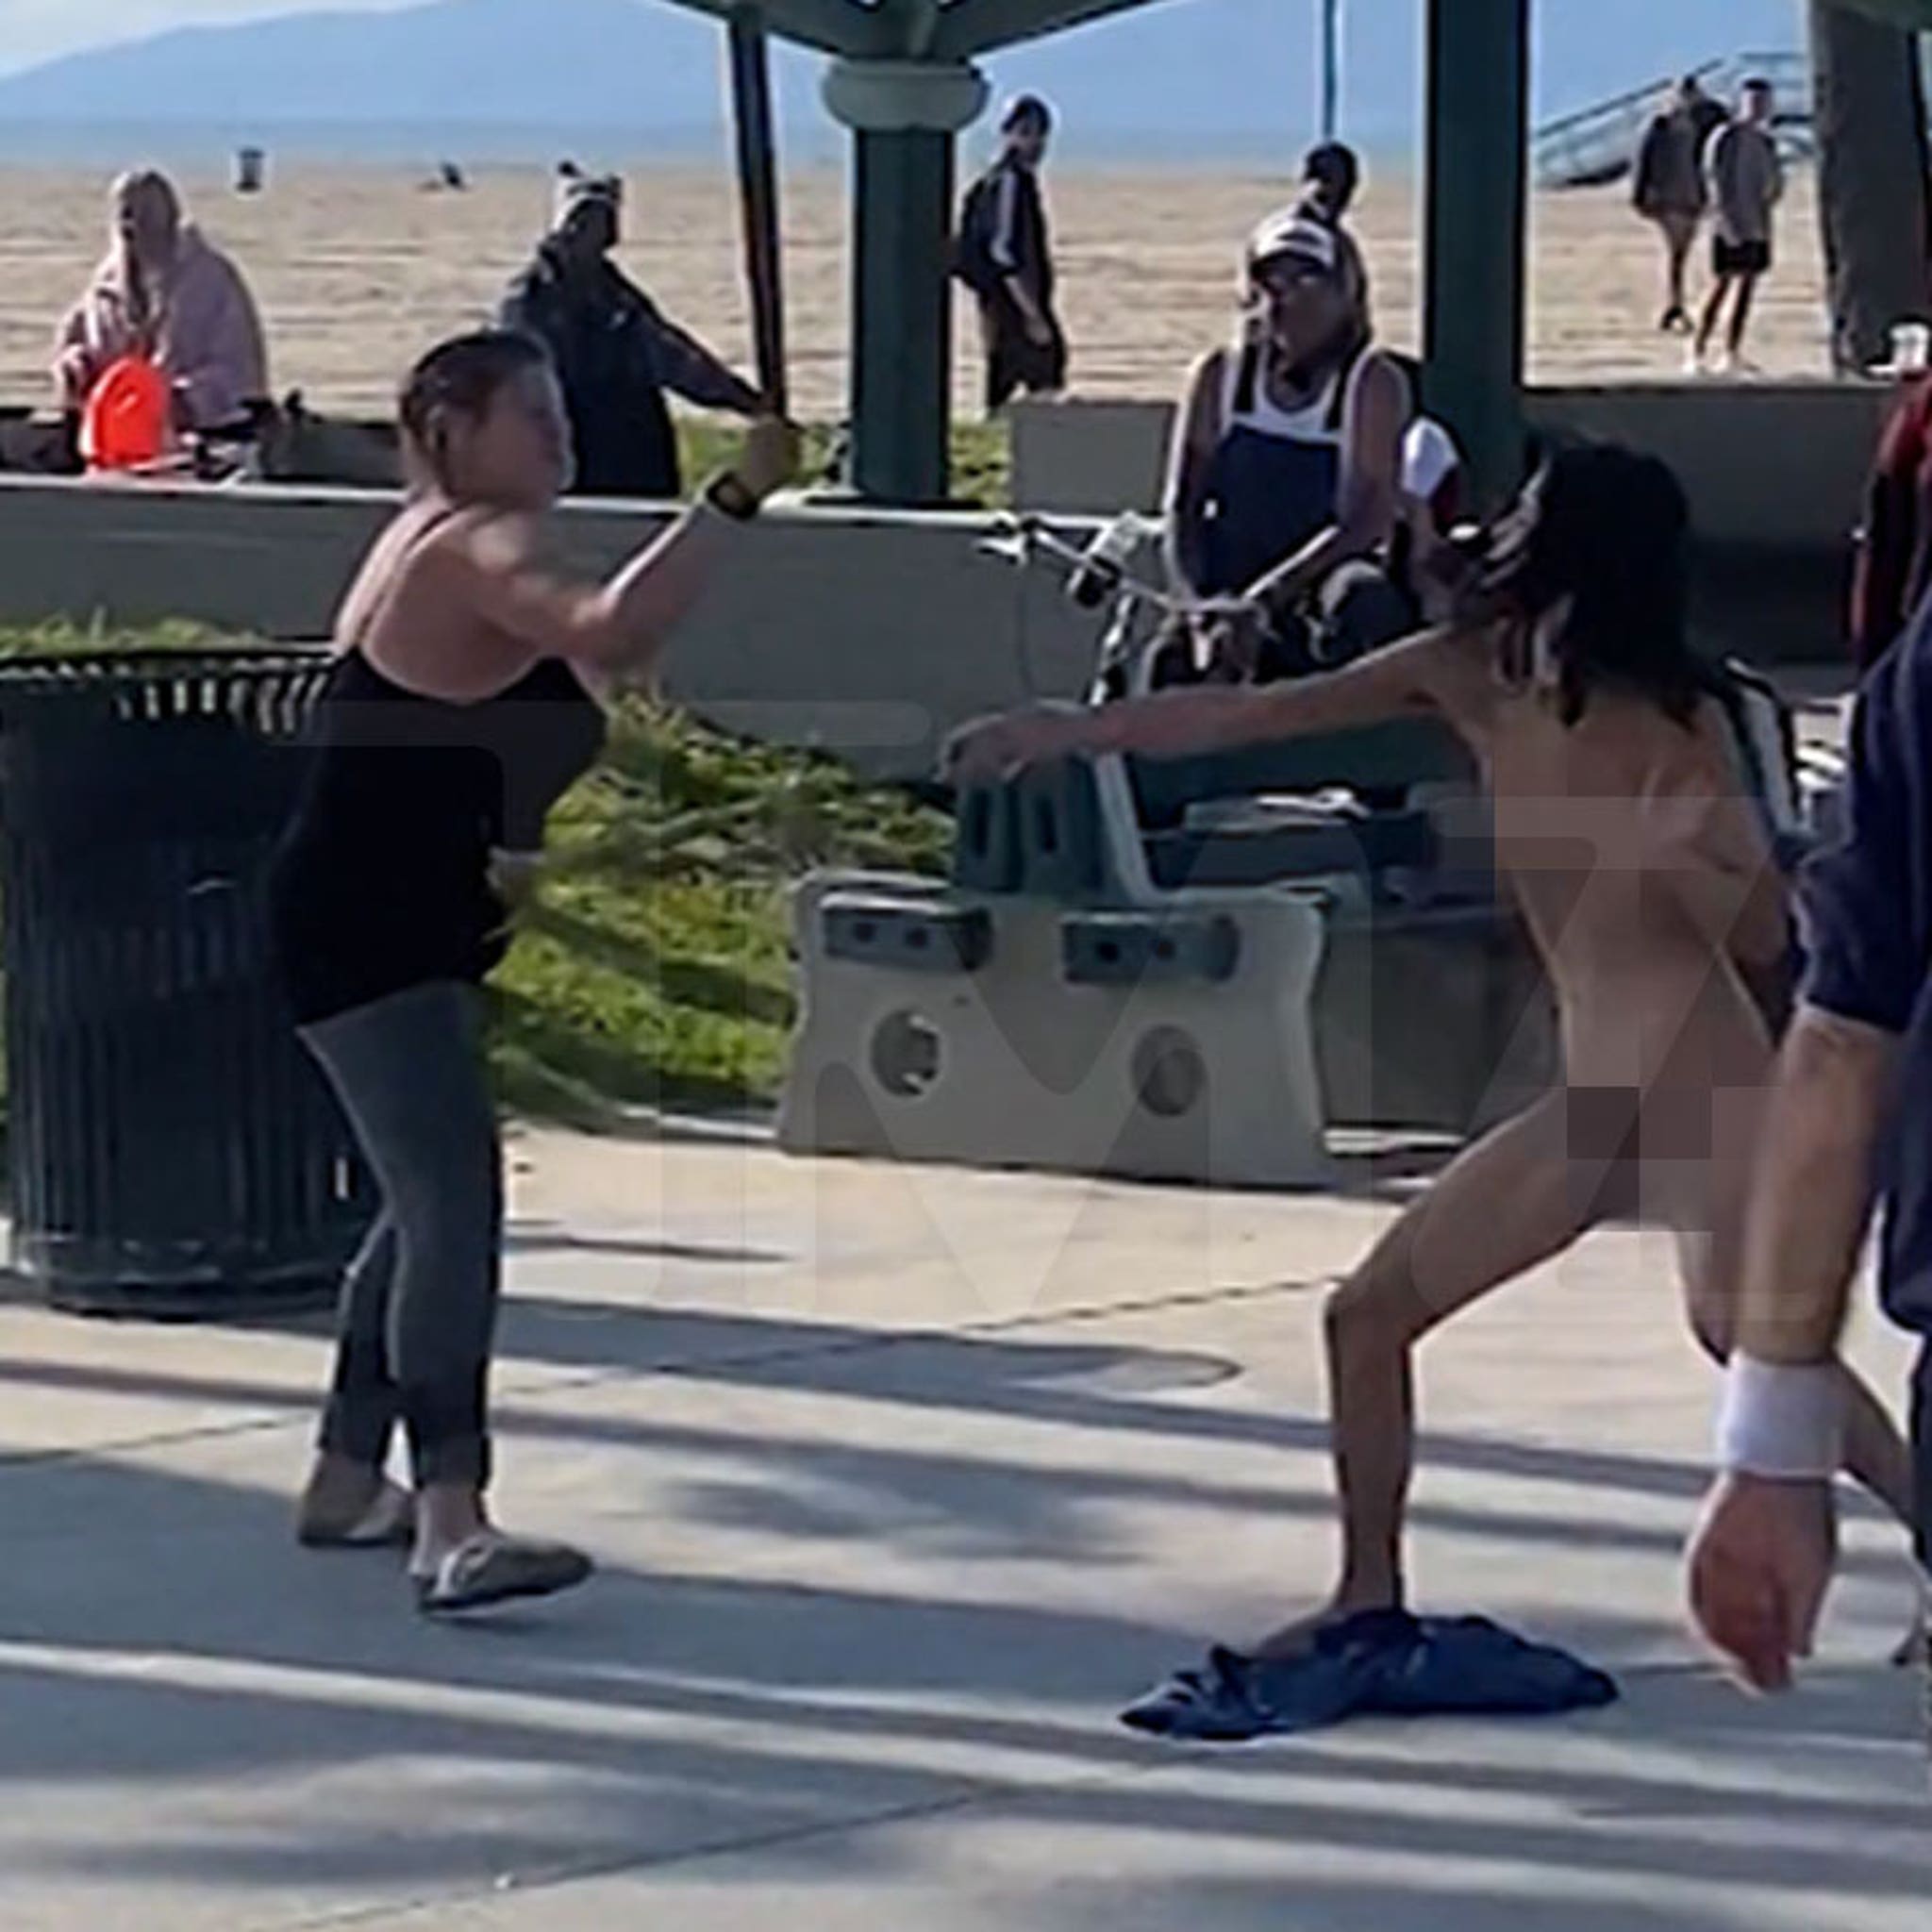 Naked Woman Gets Into Barbaric Fight in Venice Beach, Spiked Clubs